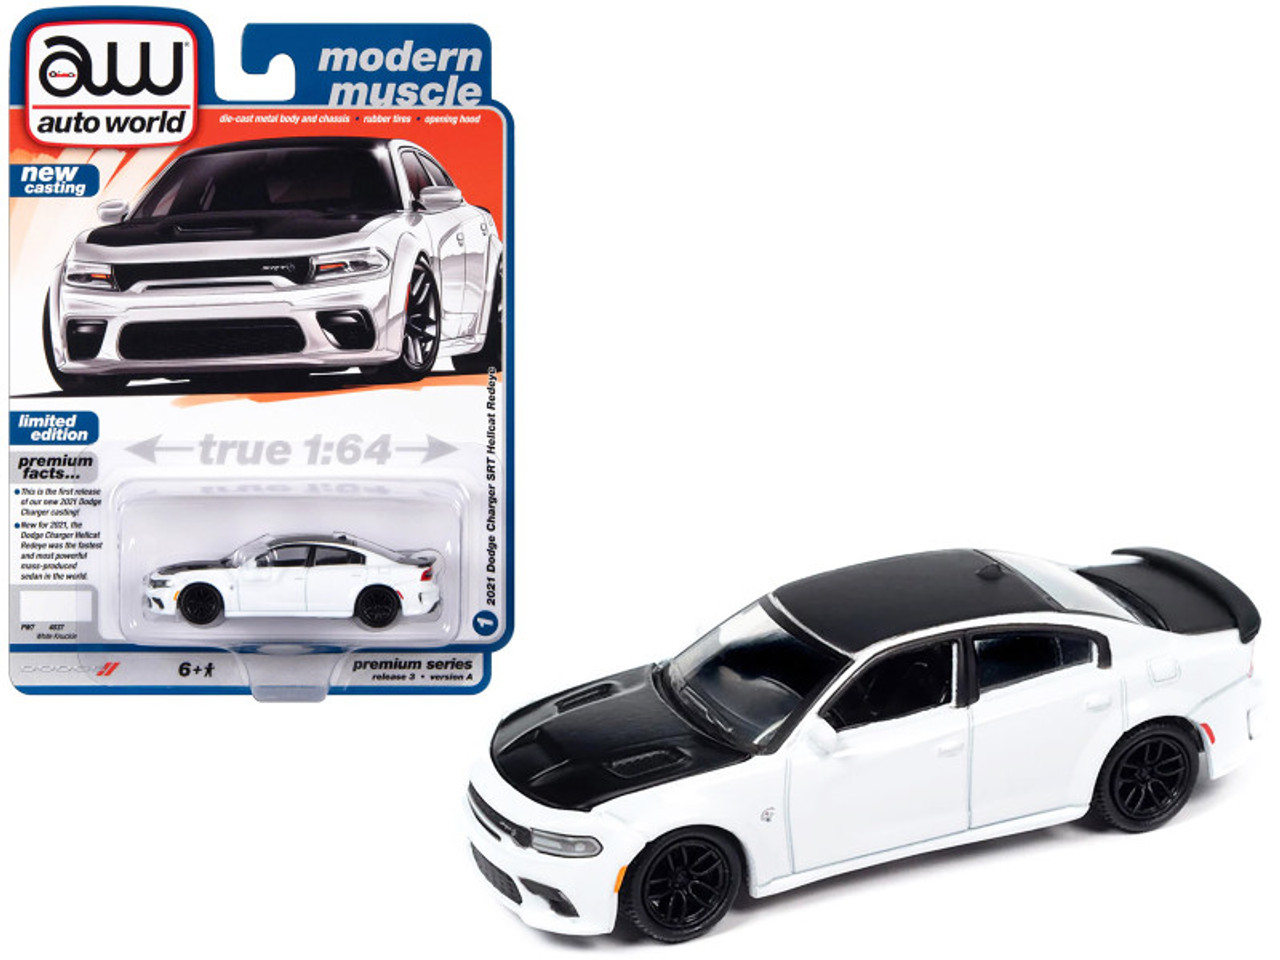 2021 Dodge Charger SRT Hellcat Redeye White Knuckle with Black Hood and Top "Modern Muscle" Limited Edition 1/64 Diecast Model Car by Auto World